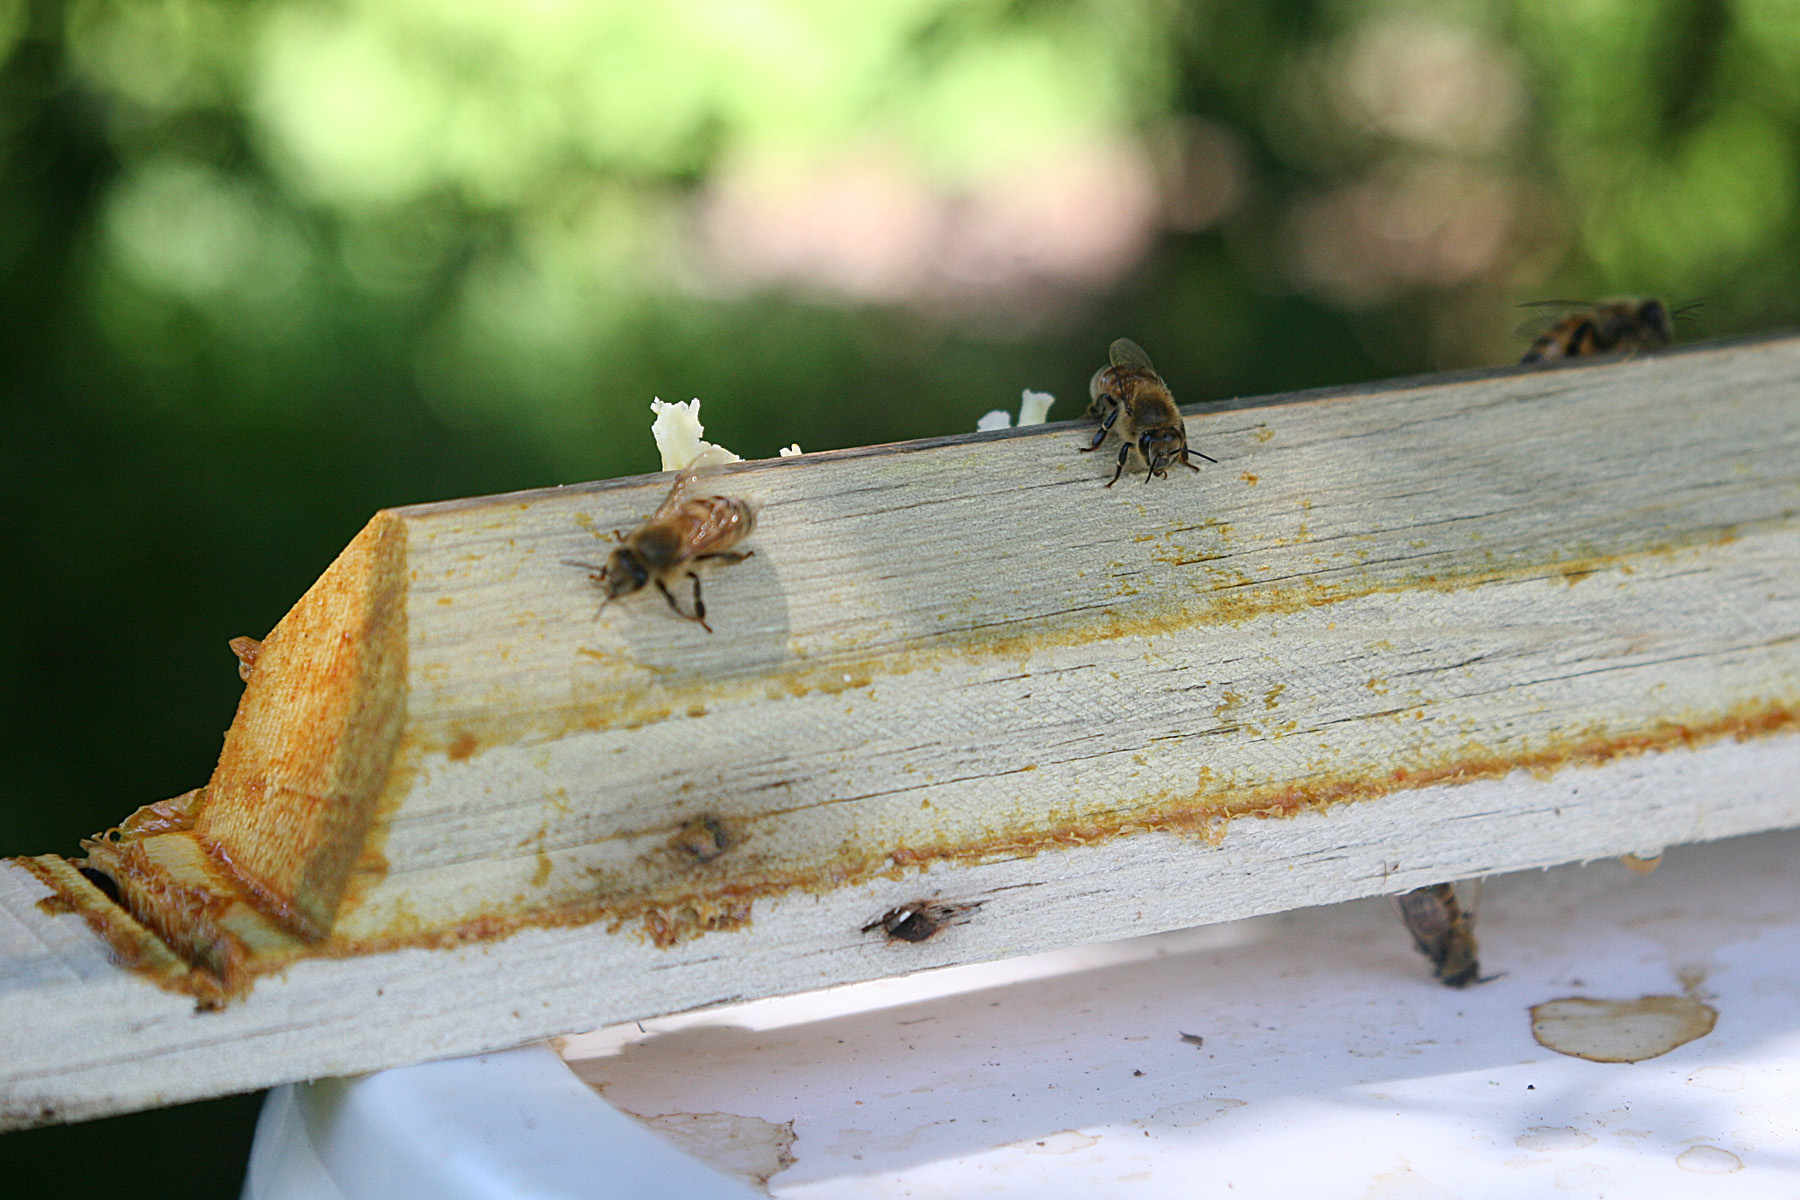 The Advantages of Small Cell Bees Keeping Backyard Bees